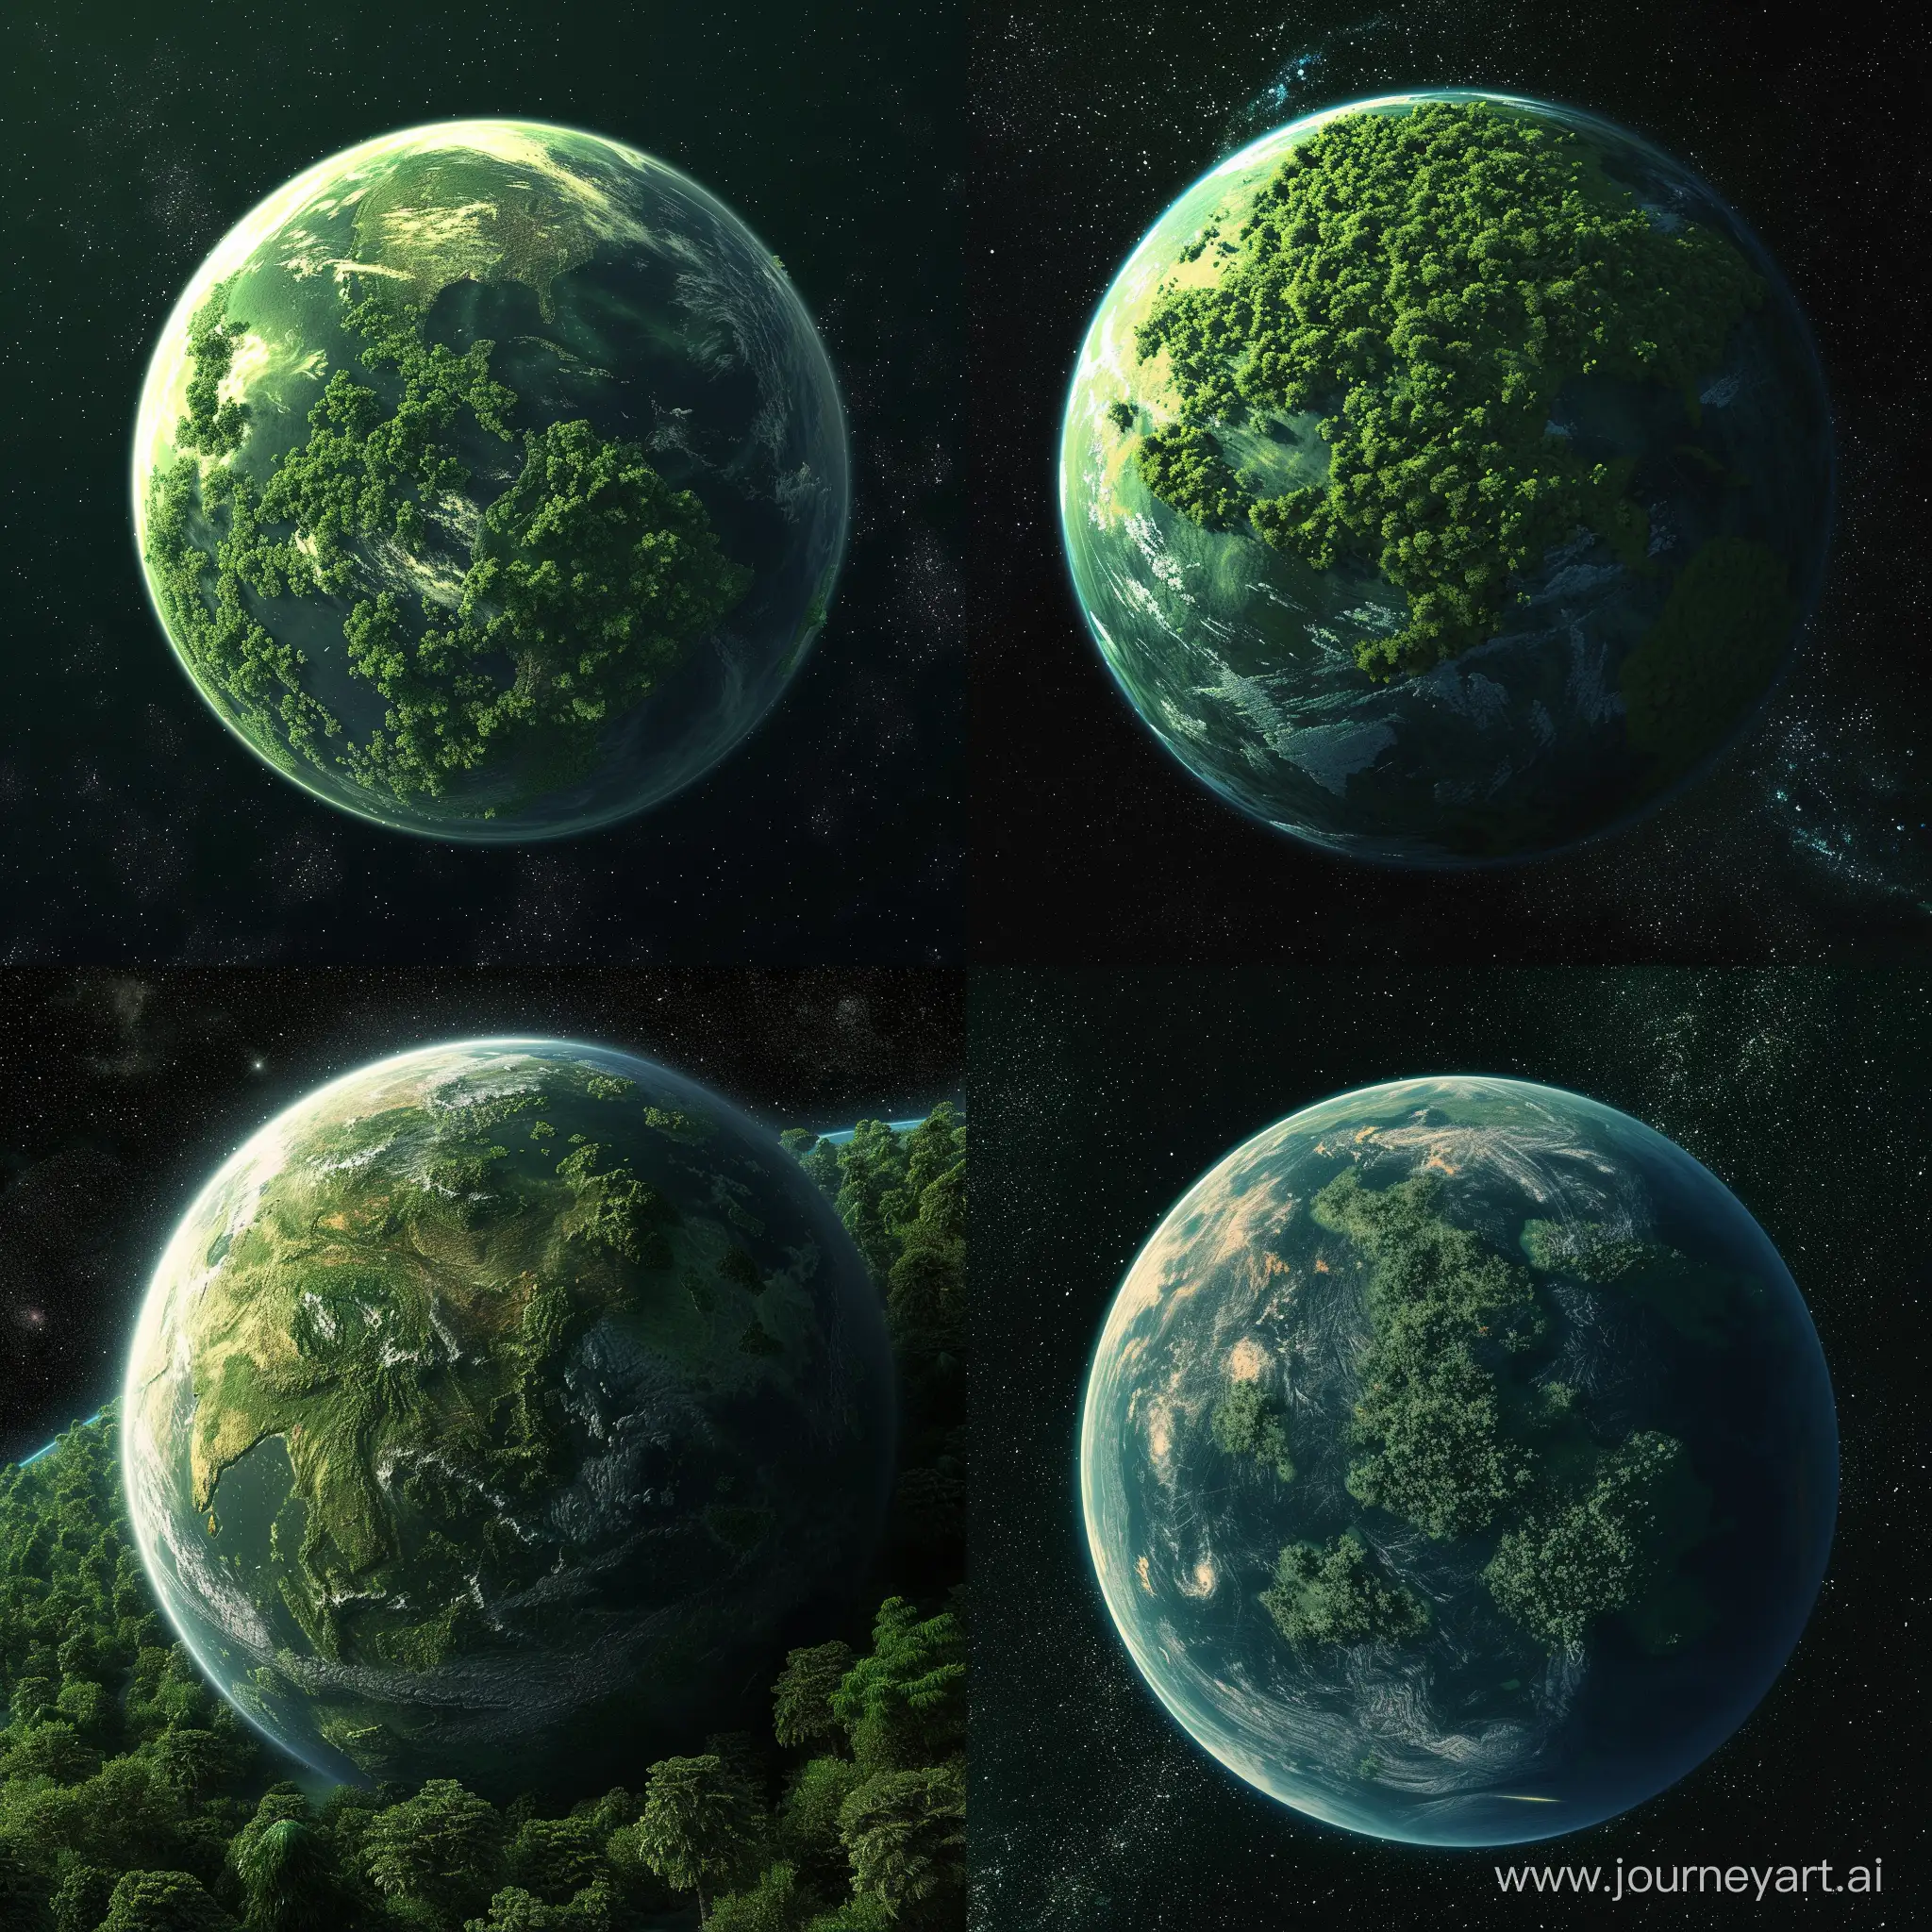 Lush-Greenery-on-a-Distant-EarthLike-Planet